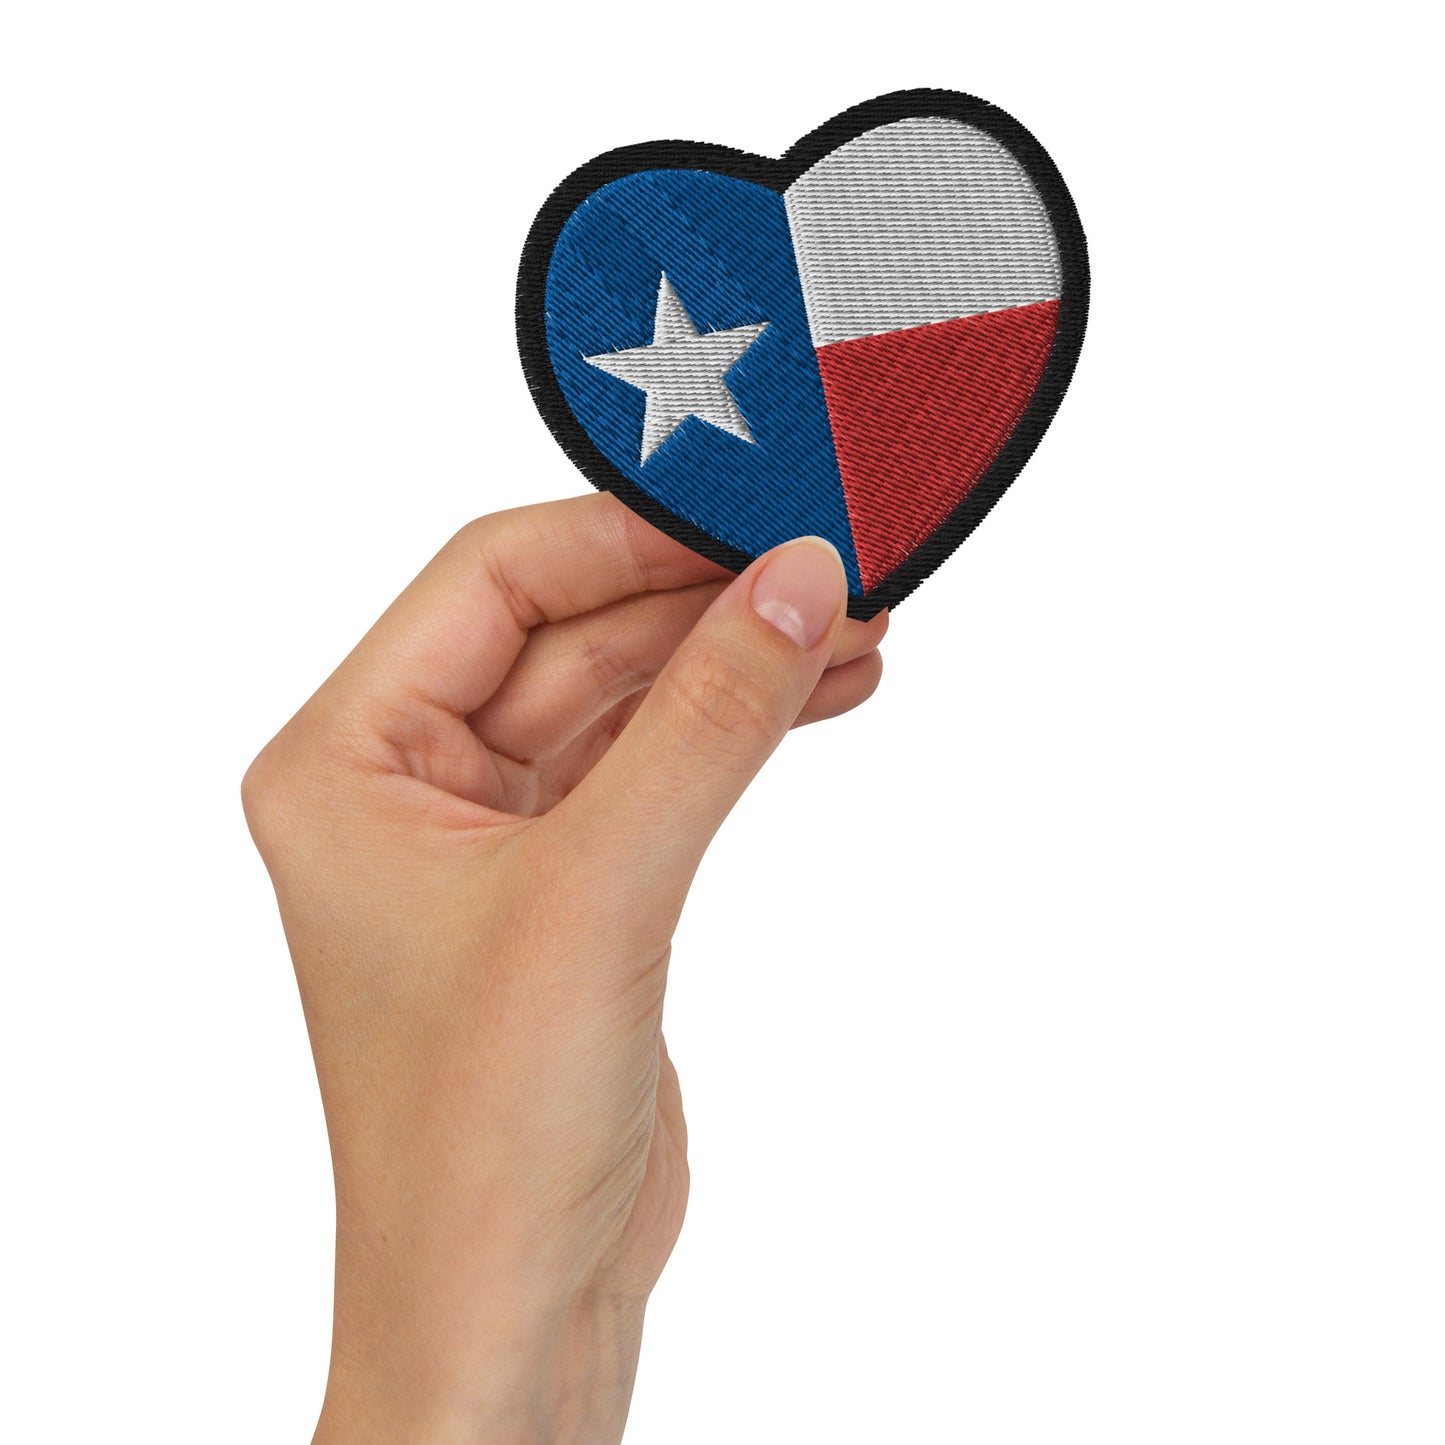 High Quality Heart-Shaped Embroidered Texas Flag Patch